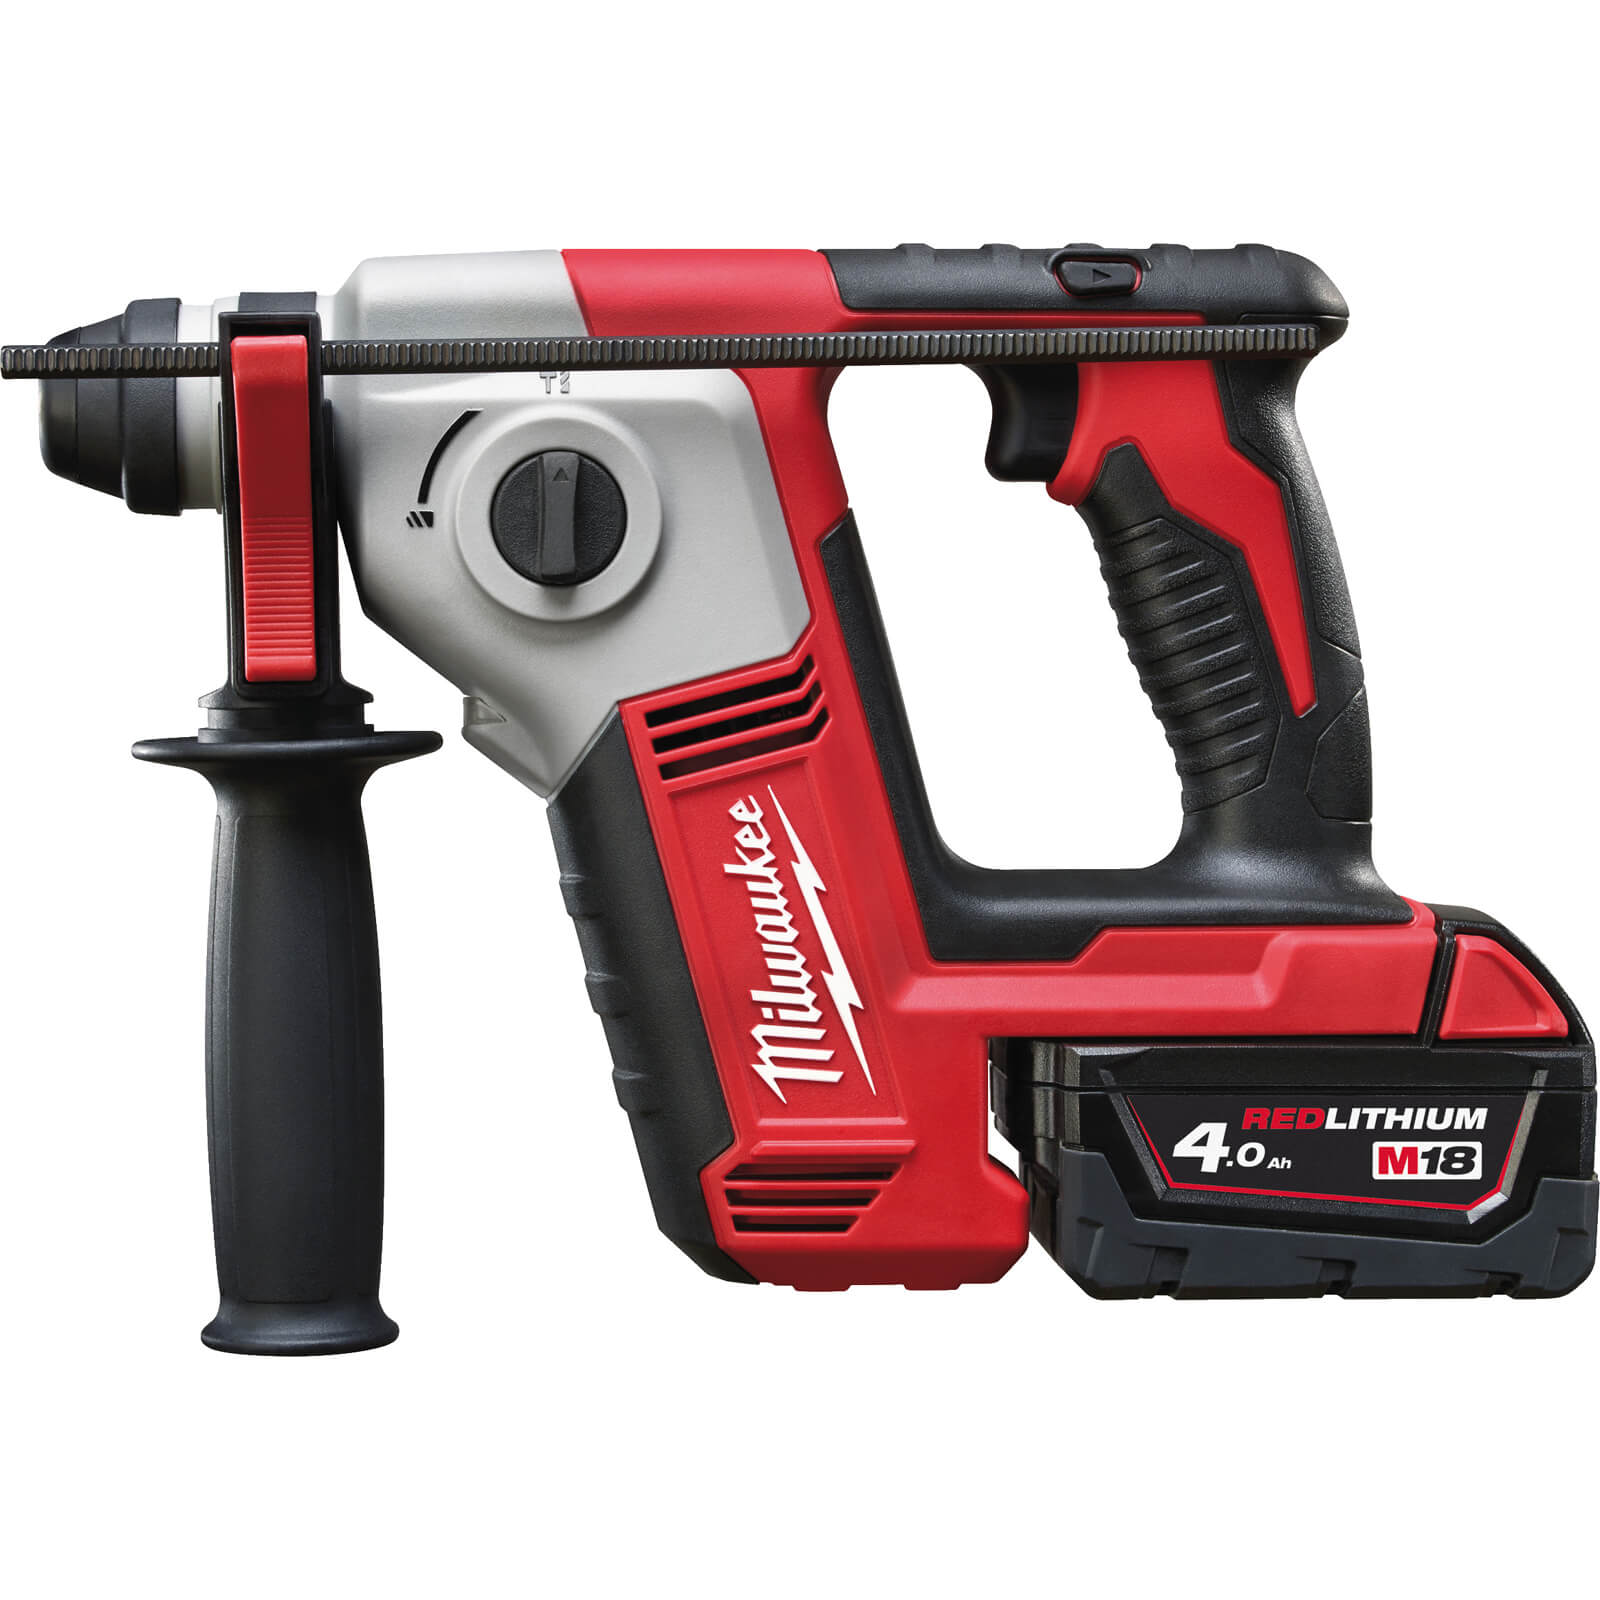 Image of Milwaukee M18 BH 18v Cordless Compact SDS Plus Hammer Drill 2 x 4ah Li-ion Charger Case